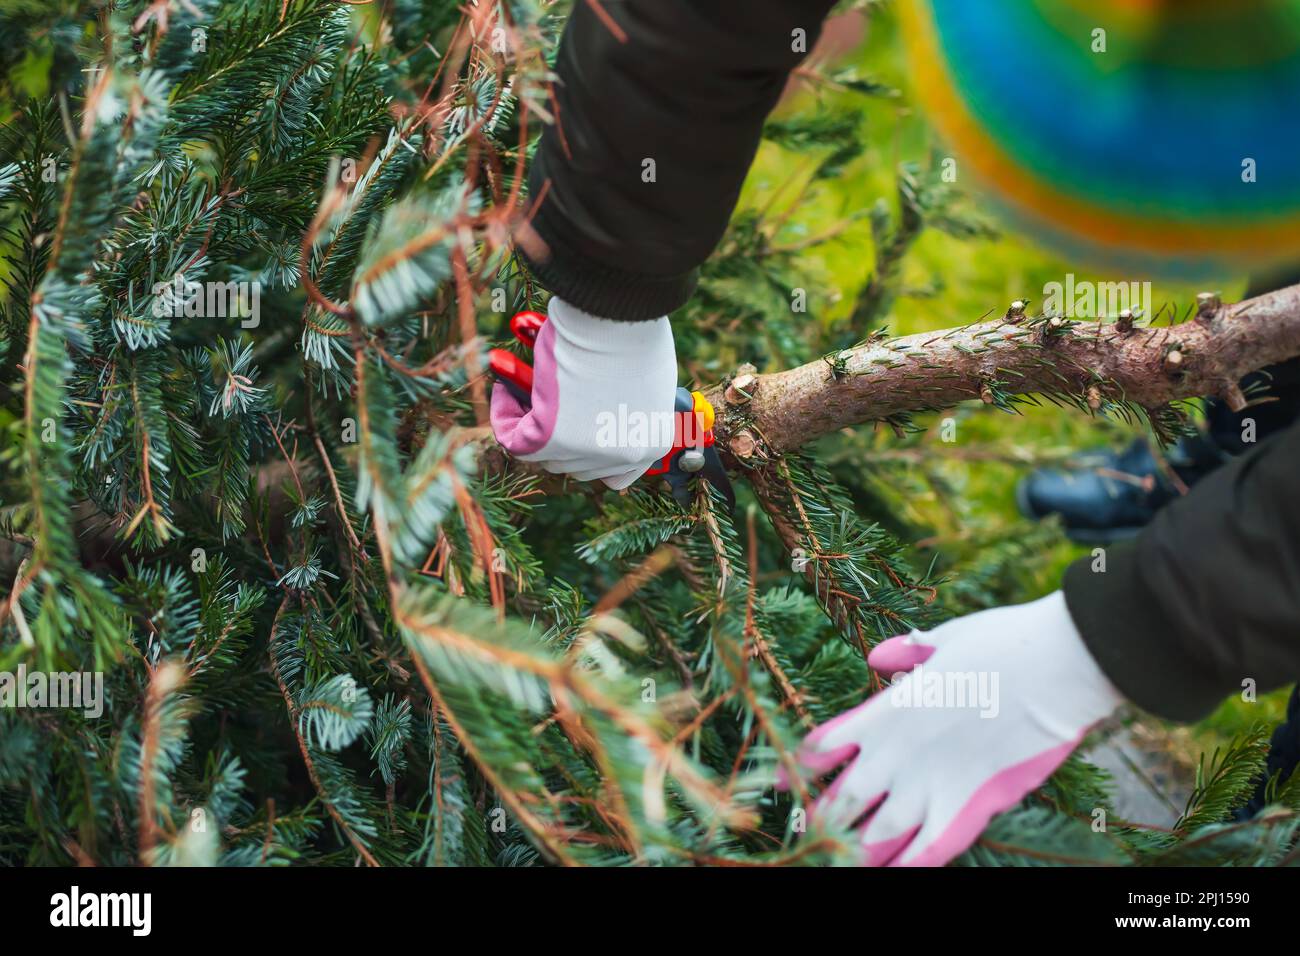 Gardening  work in autumn and winter. Teenager is sawing old Christmas tree with electric saw and cutting branches . Stock Photo